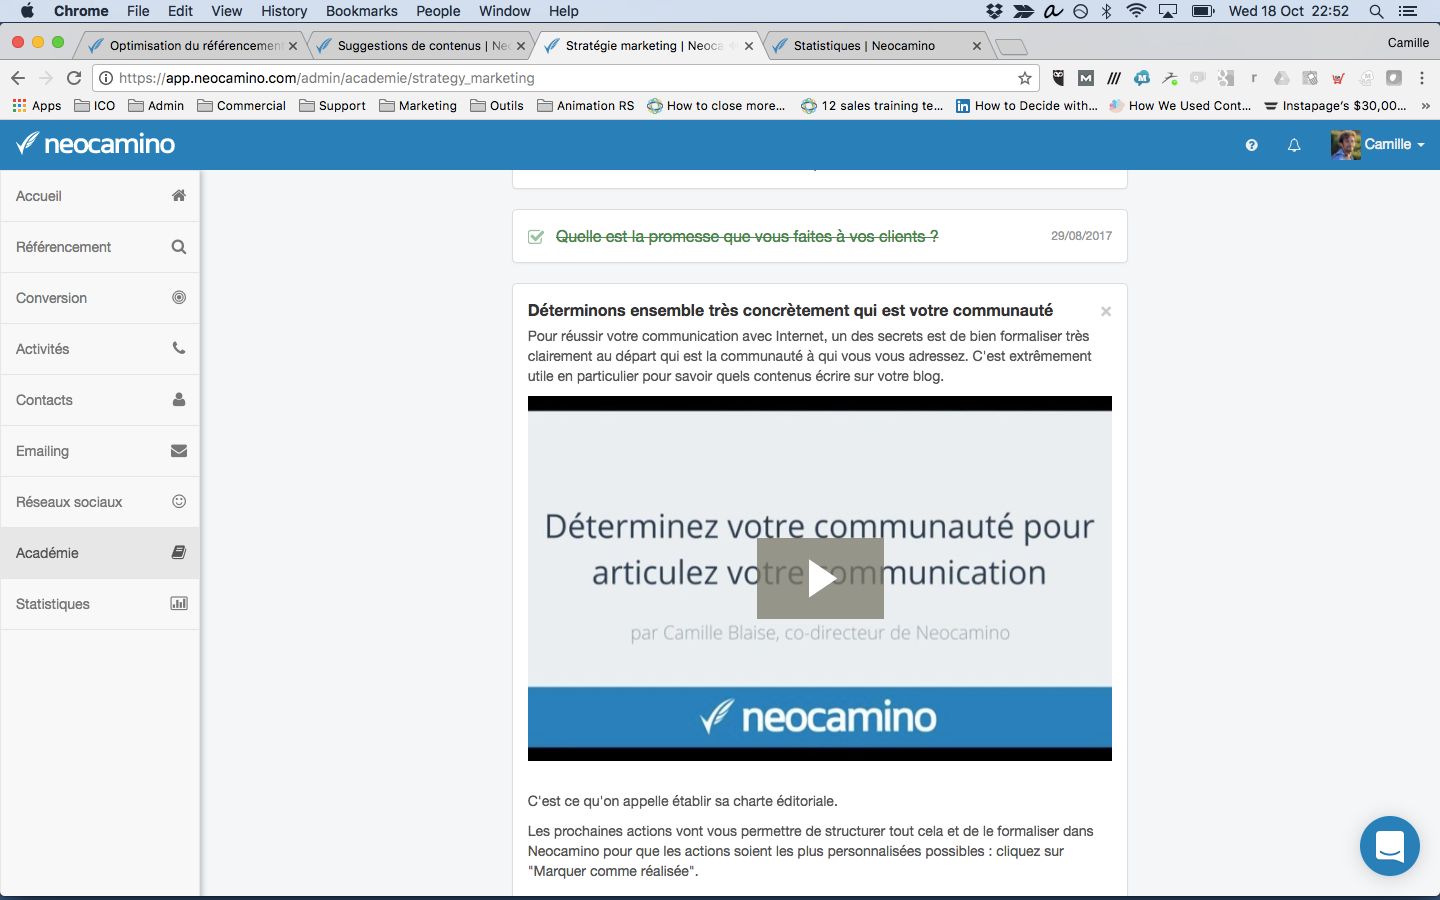 neocamino - Neocamino Academy to learn to use all the necessary marketing tools